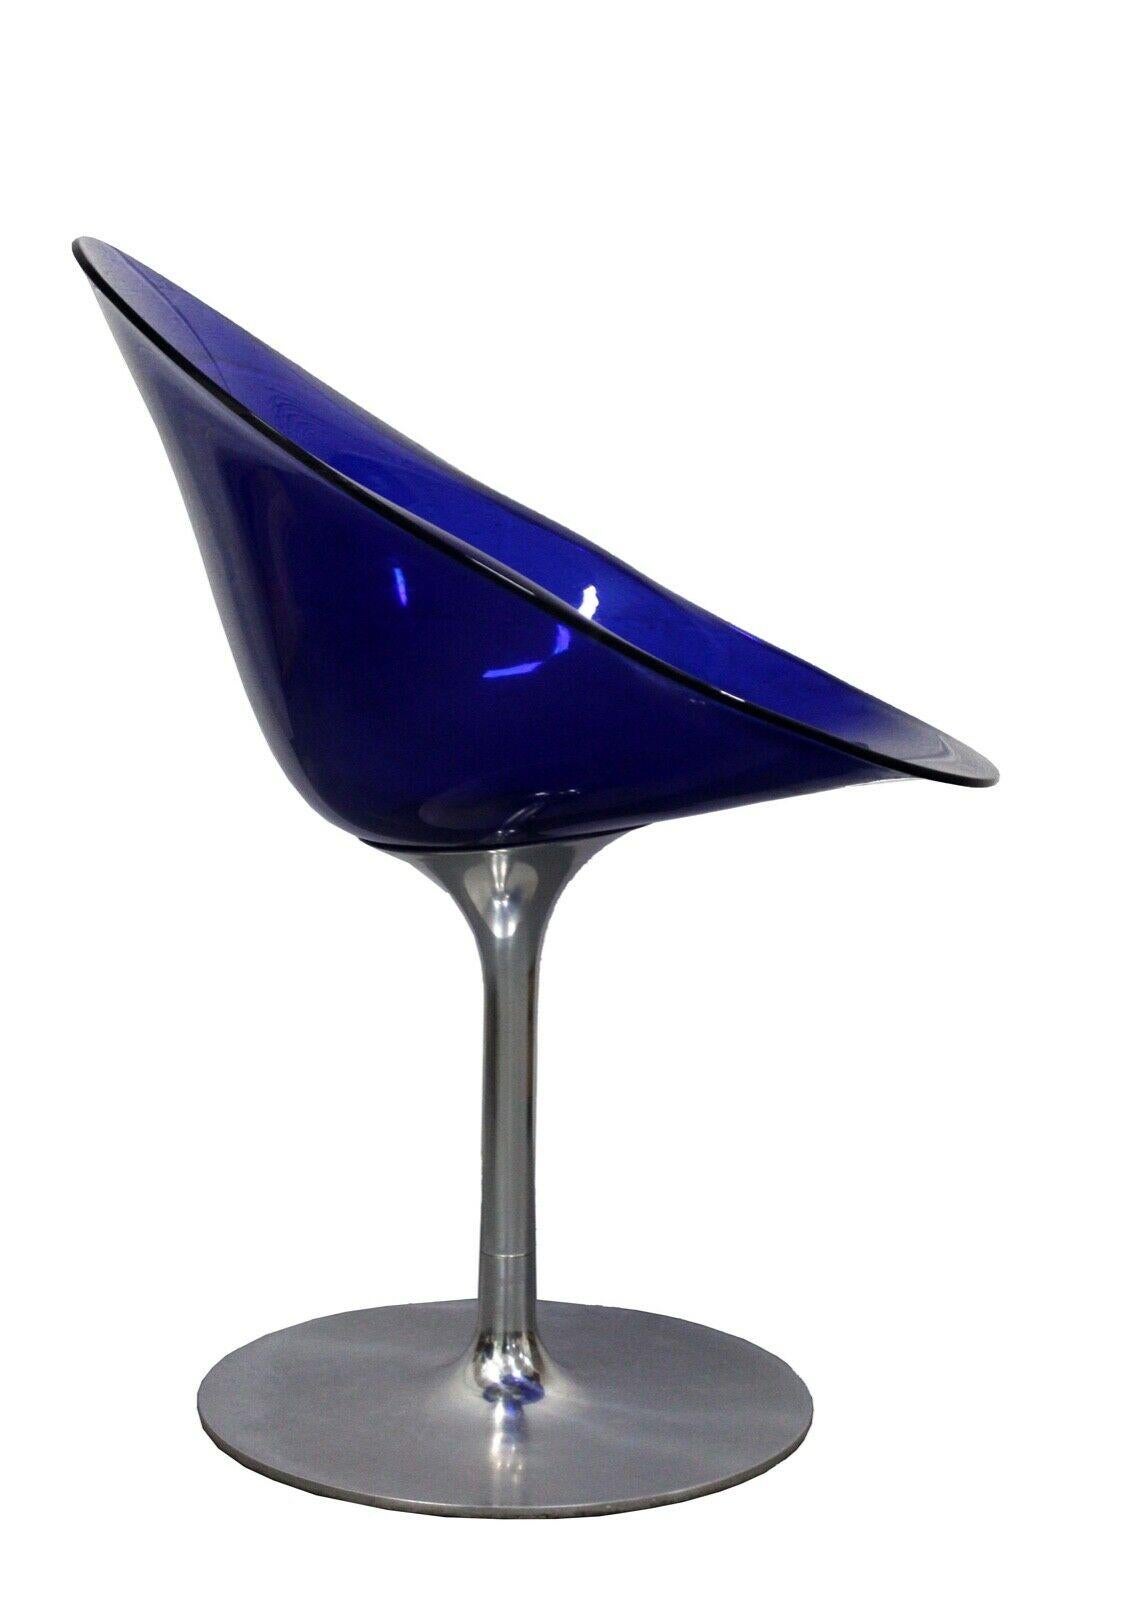 For your consideration is this funky fresh royal blue Ero S chair by Philippe Starck for Kartell designed and manufactured in Italy. With its iconic organic egg shape this chair has a refined finish and an interesting use of vibrant color.